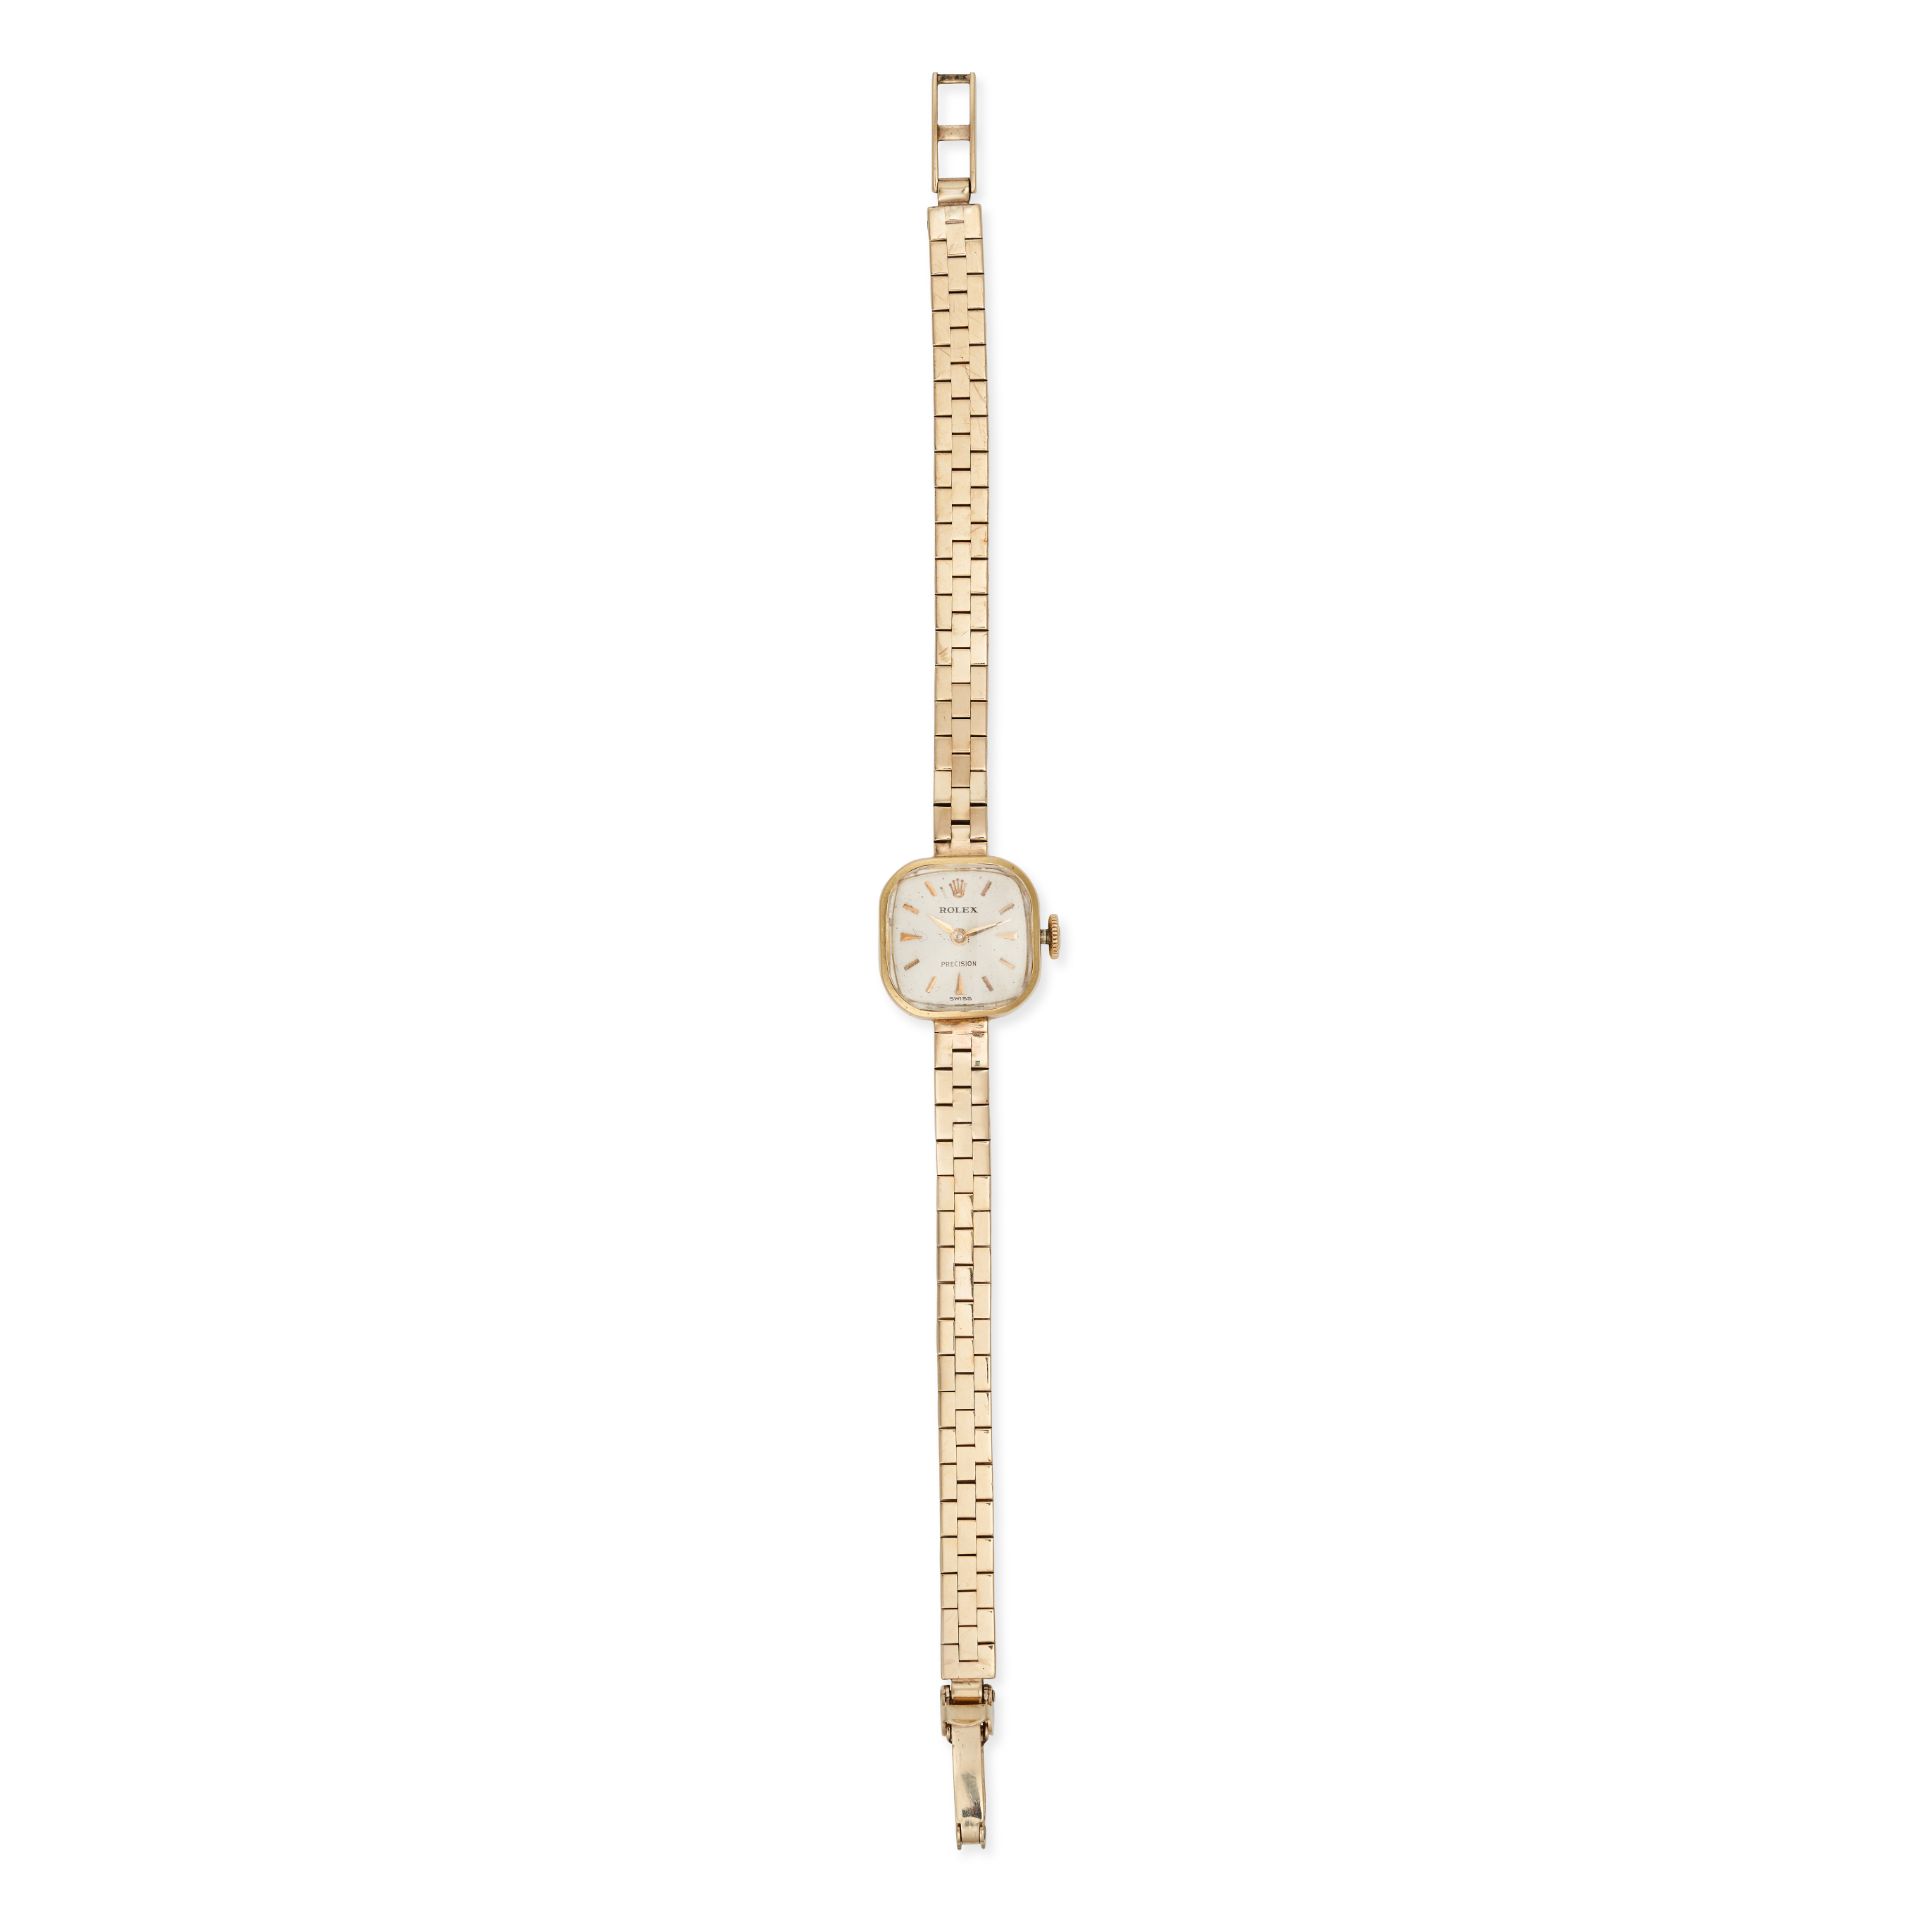 ROLEX - A VINTAGE LADIES' ROLEX PRECISION WRISTWATCH in 9ct and 18ct yellow gold, 17 jewels manua...